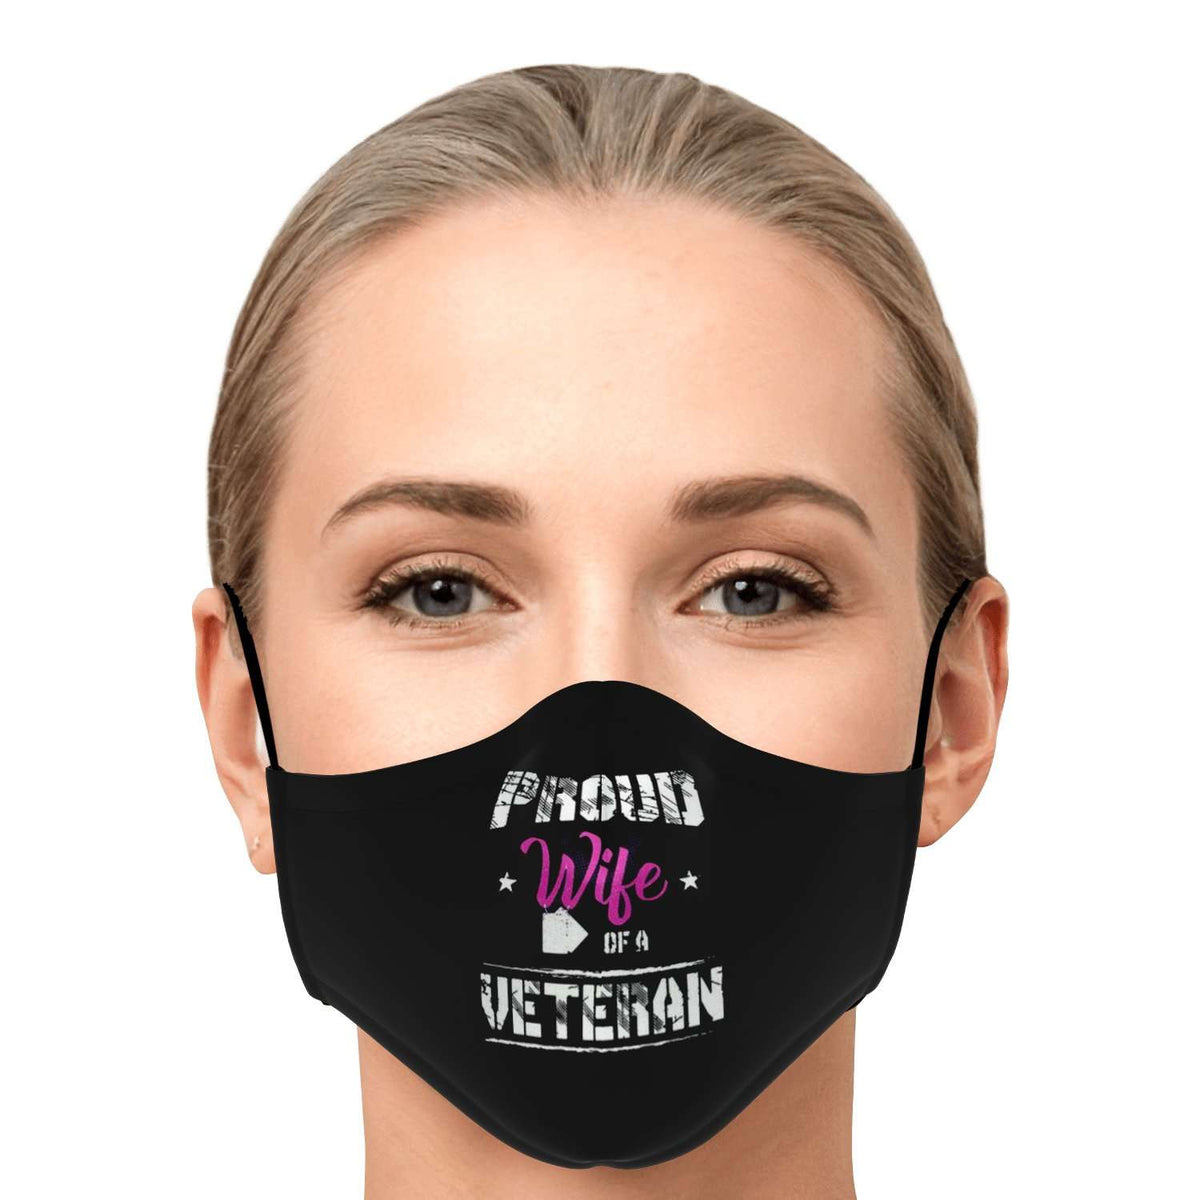 Designs by MyUtopia Shout Out:Proud Wife of a Veteran Fitted Fabric Face Mask w. Adjustable Ear Loops,Adult / Single / No filters,Fabric Face Mask